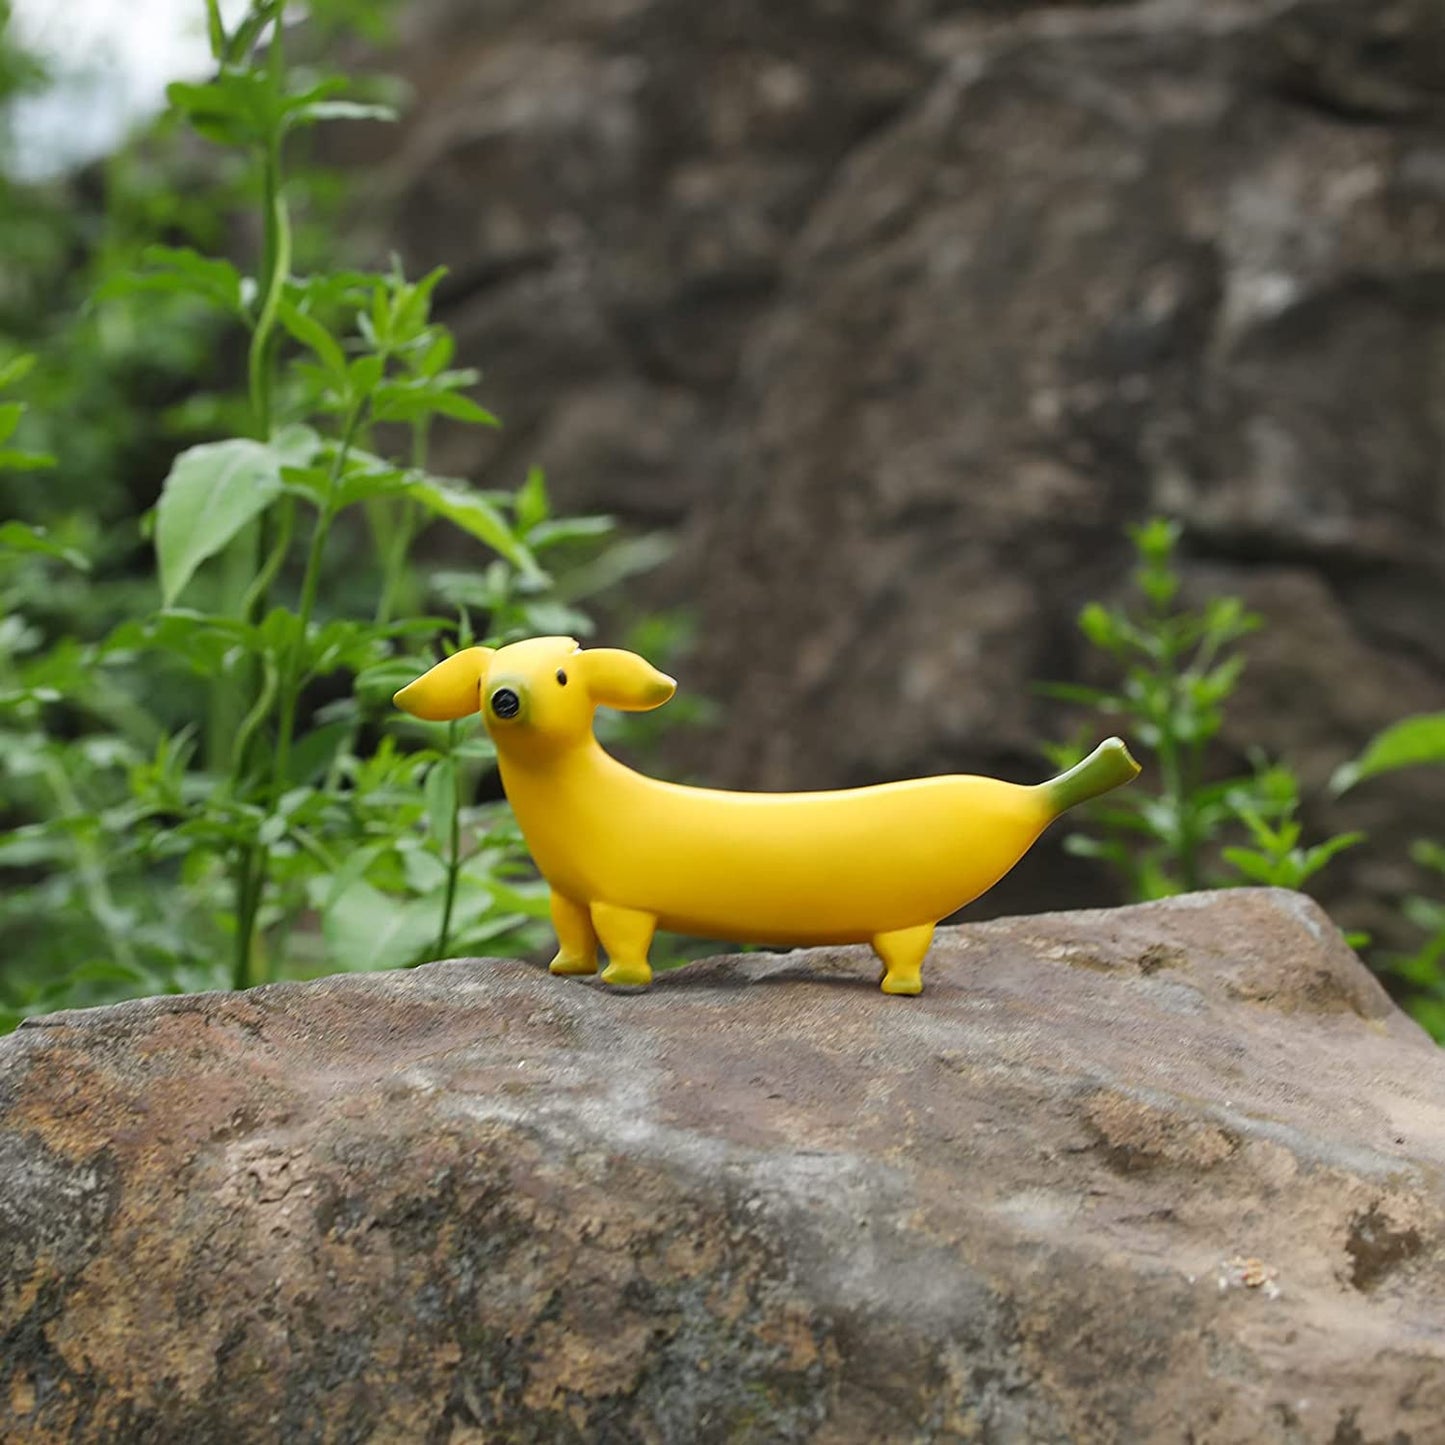 A banana dog is sitting on top of a rock. This is a garden ornament shaped like a yellow banana but with a dogs head.